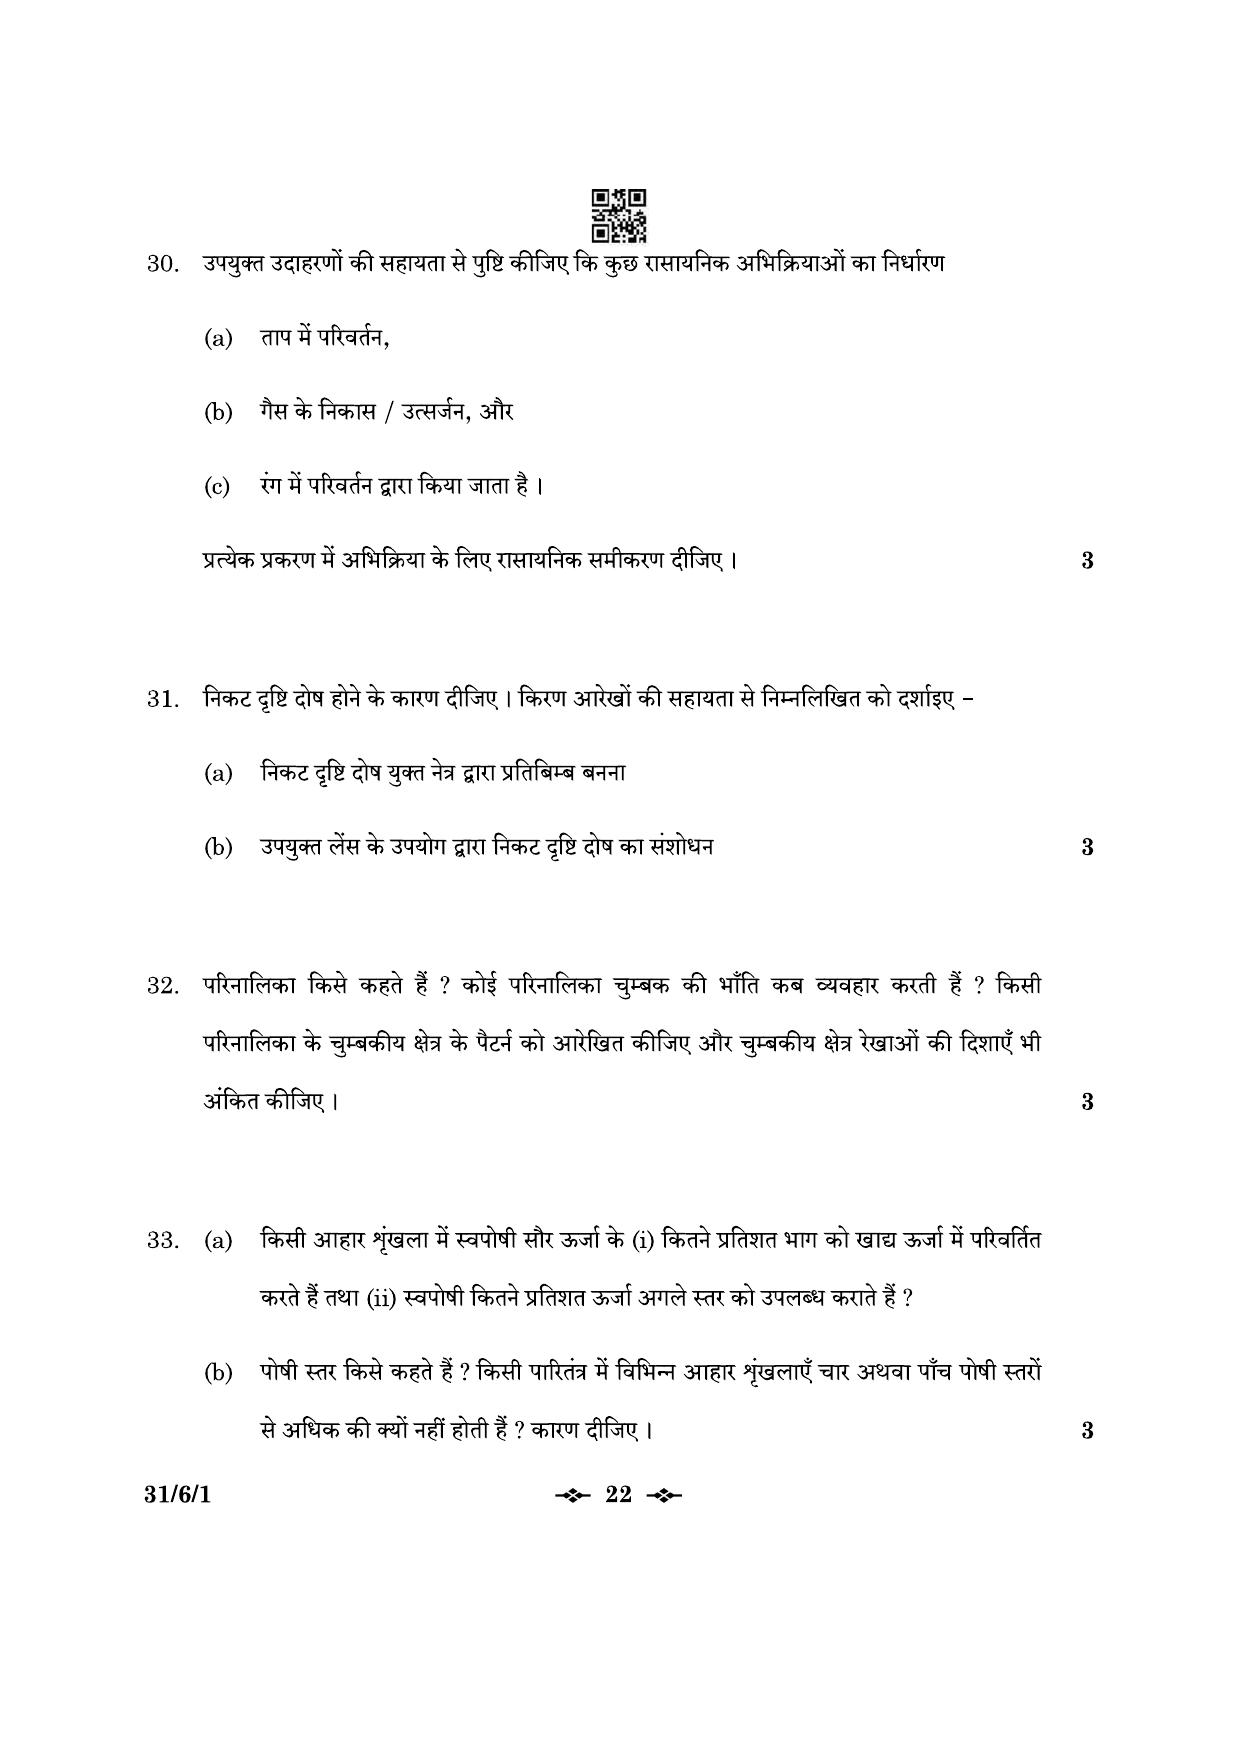 CBSE Class 10 31-6-1 Science 2023 Question Paper - Page 22